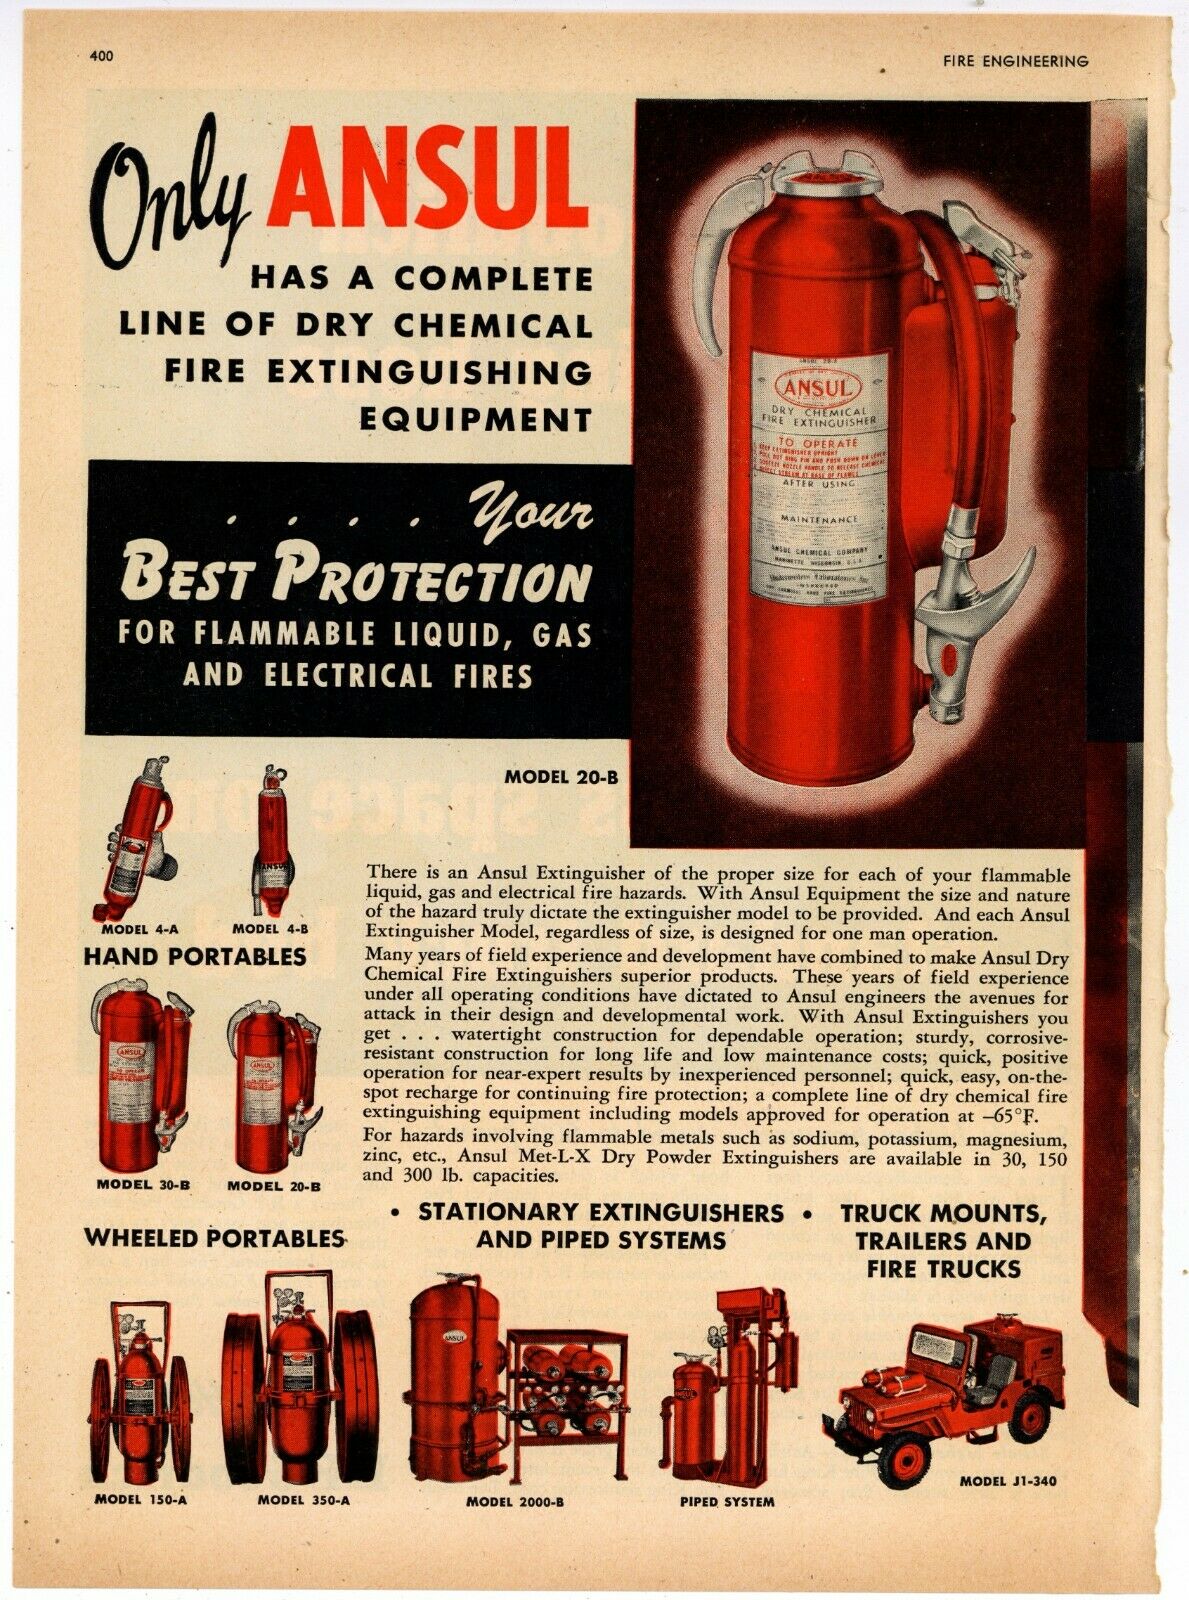 1952 Ansul Fire Extinguishers Ad: Fire Jeep Model J1-340 Pictured